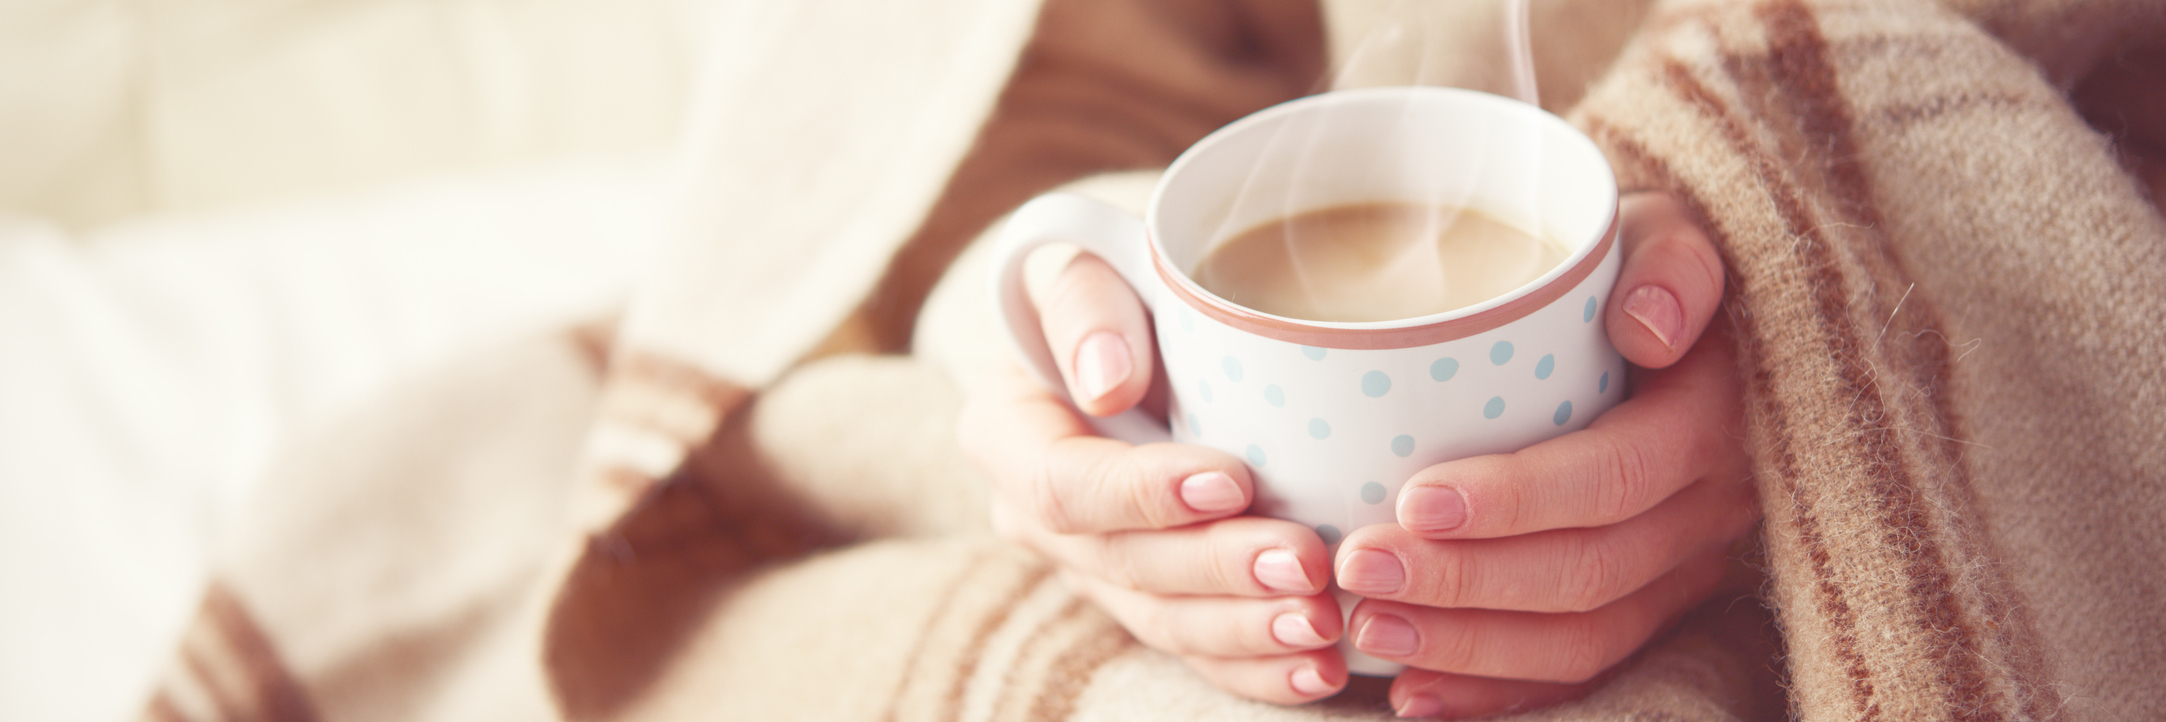 woman wrapped in a blanket and holding a mug of coffee